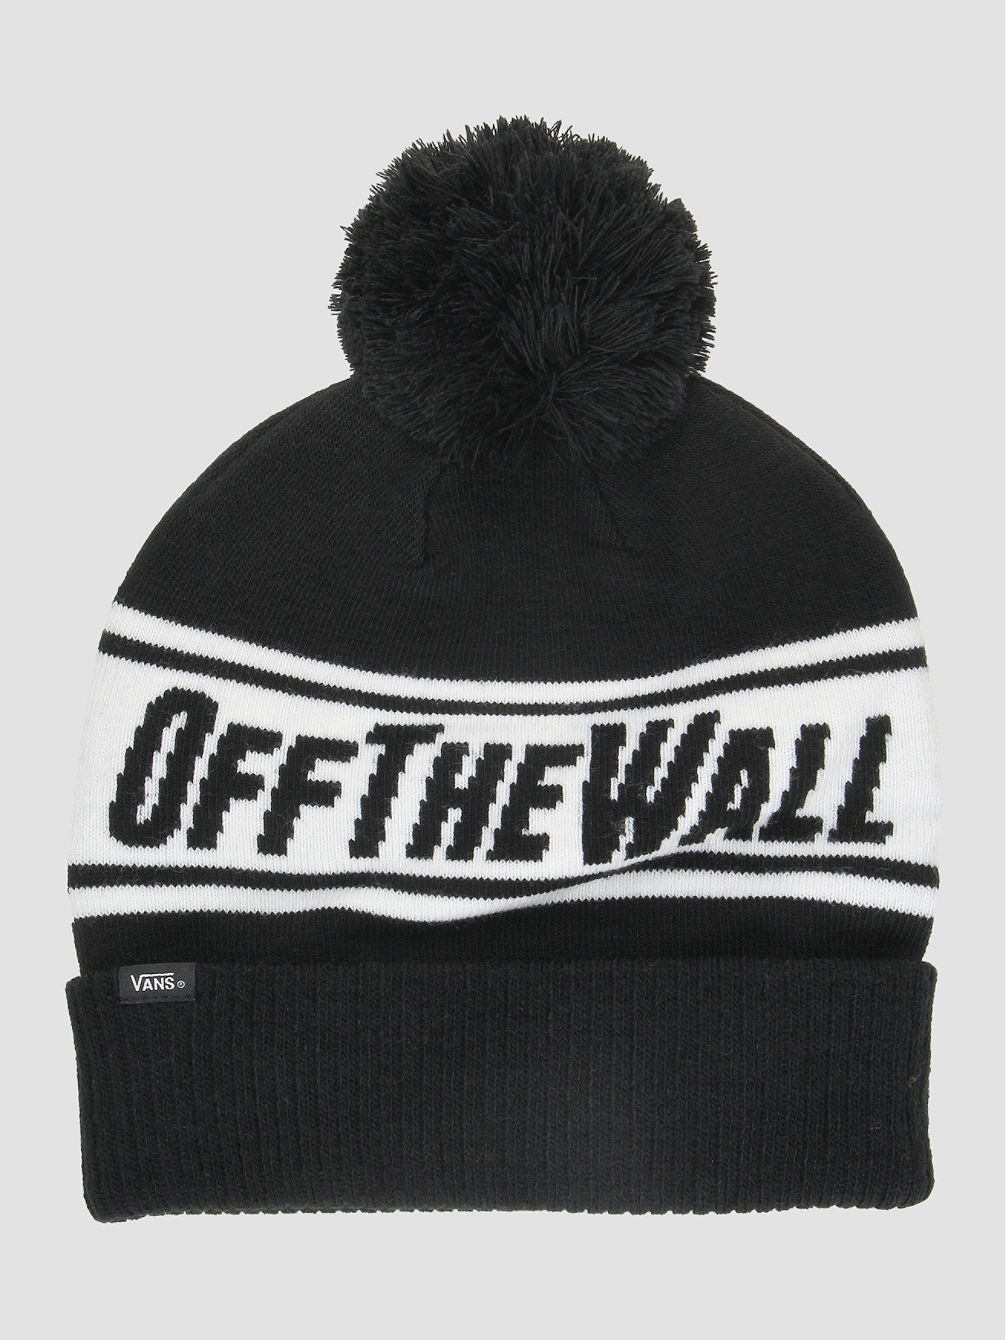 Off The Wall Pom Muts